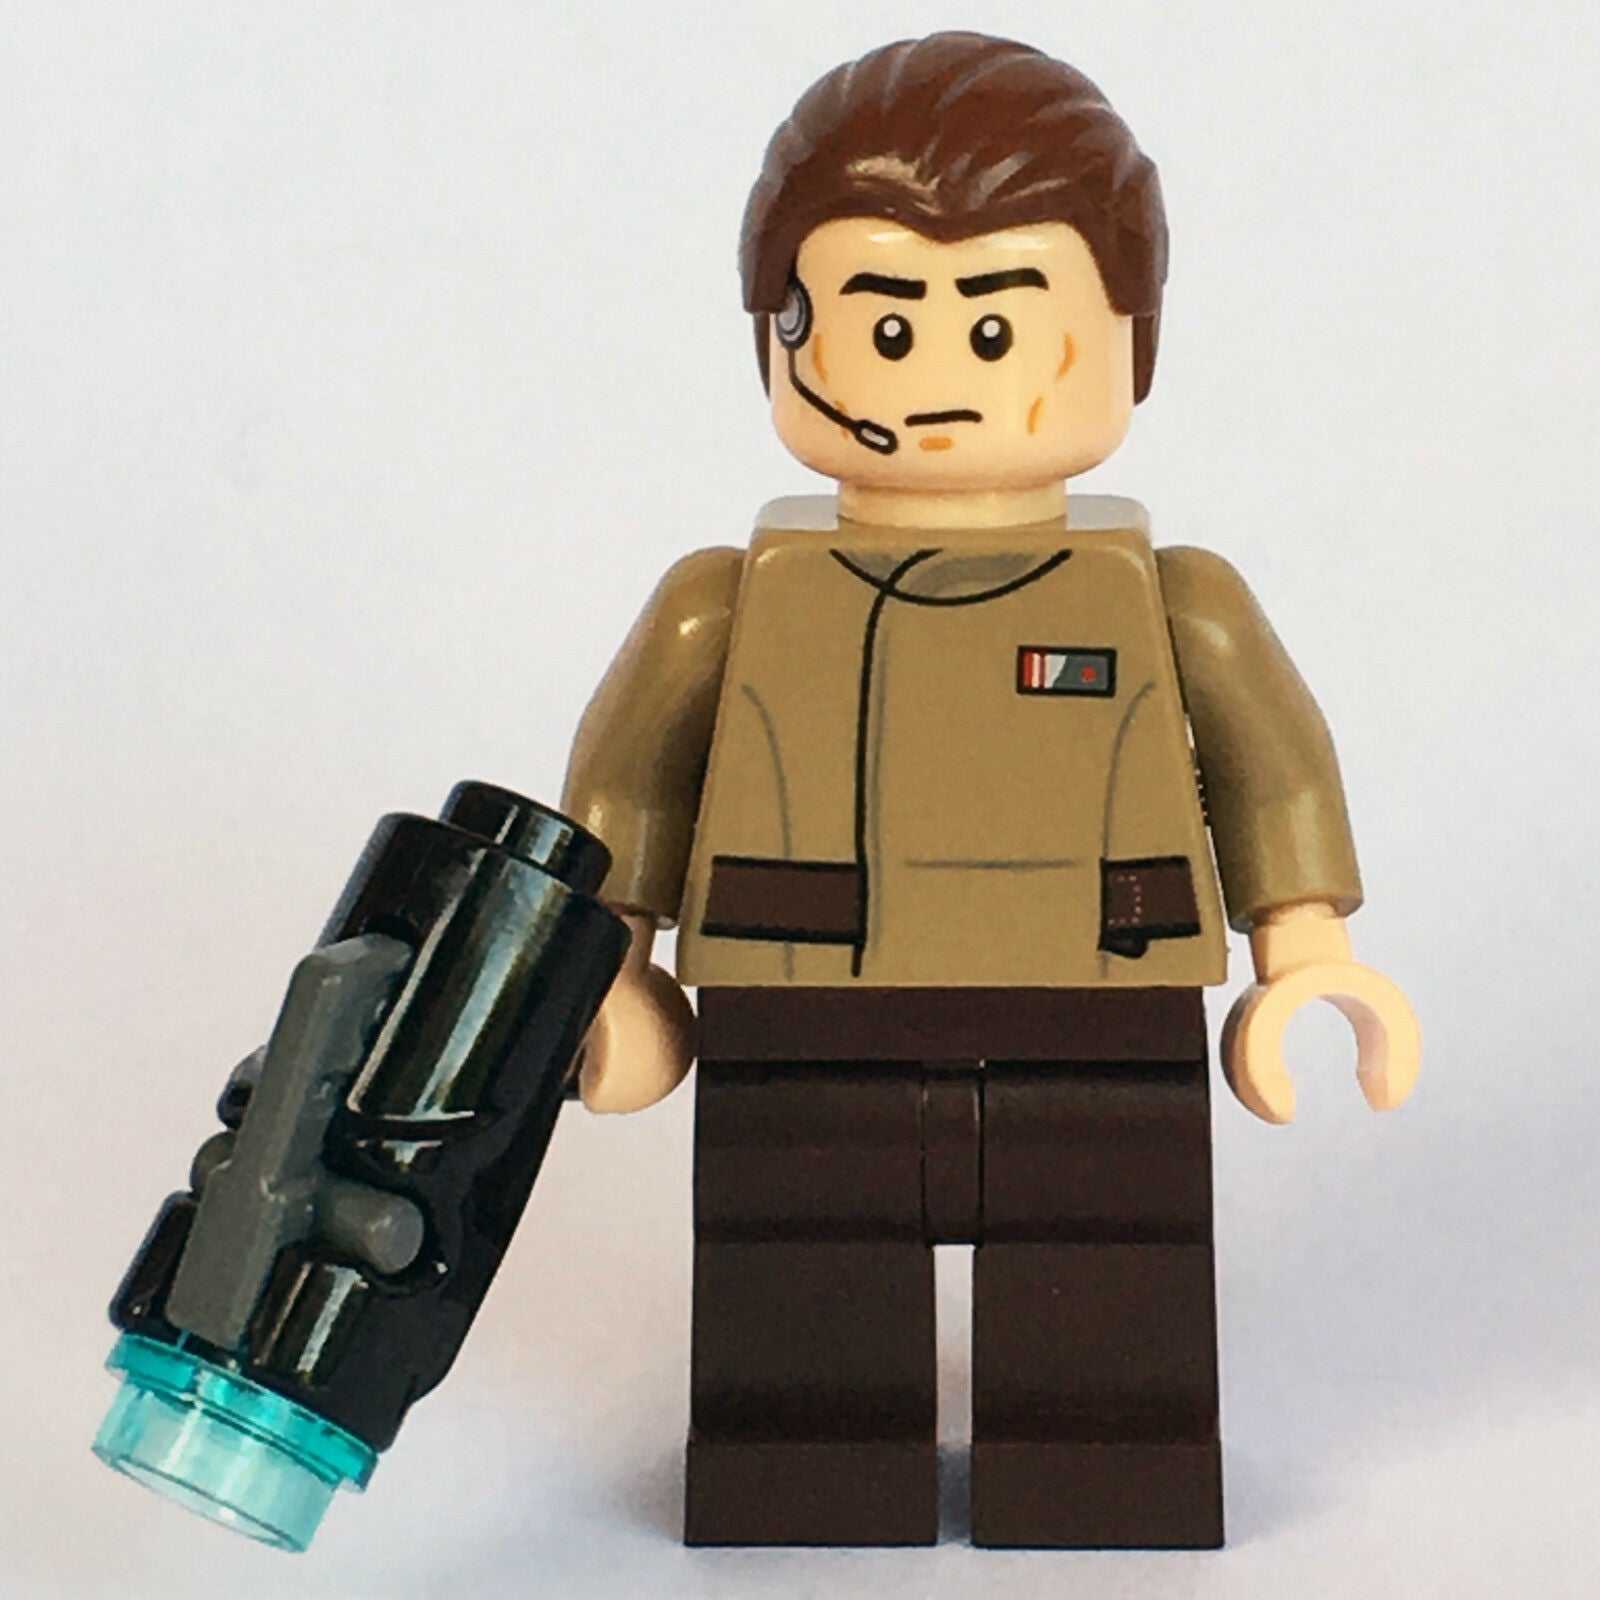 STAR WARS lego RESISTANCE OFFICER with headset force awakens Minifigure 75131 NEW - Bricks & Figures